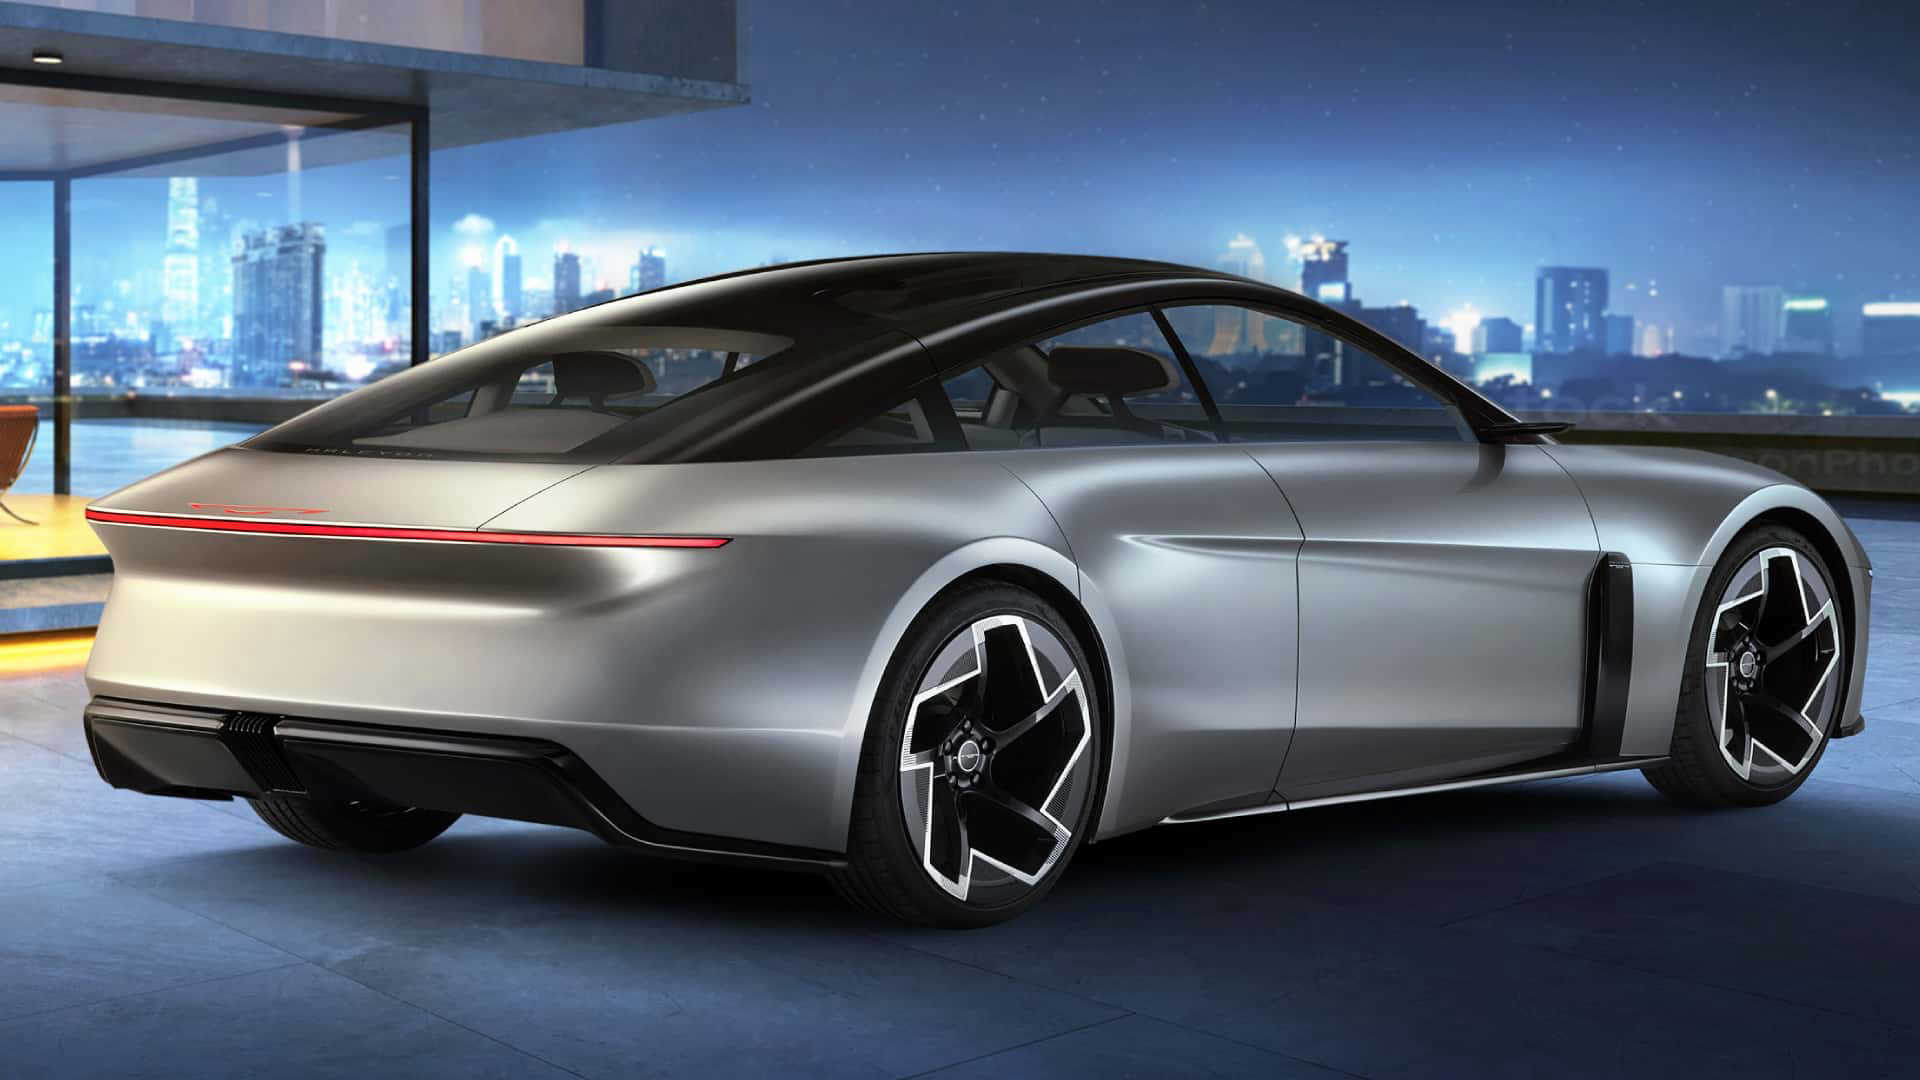 The Chrysler Halcyon Concept Is A Sleek Cruiser With Wireless Charging